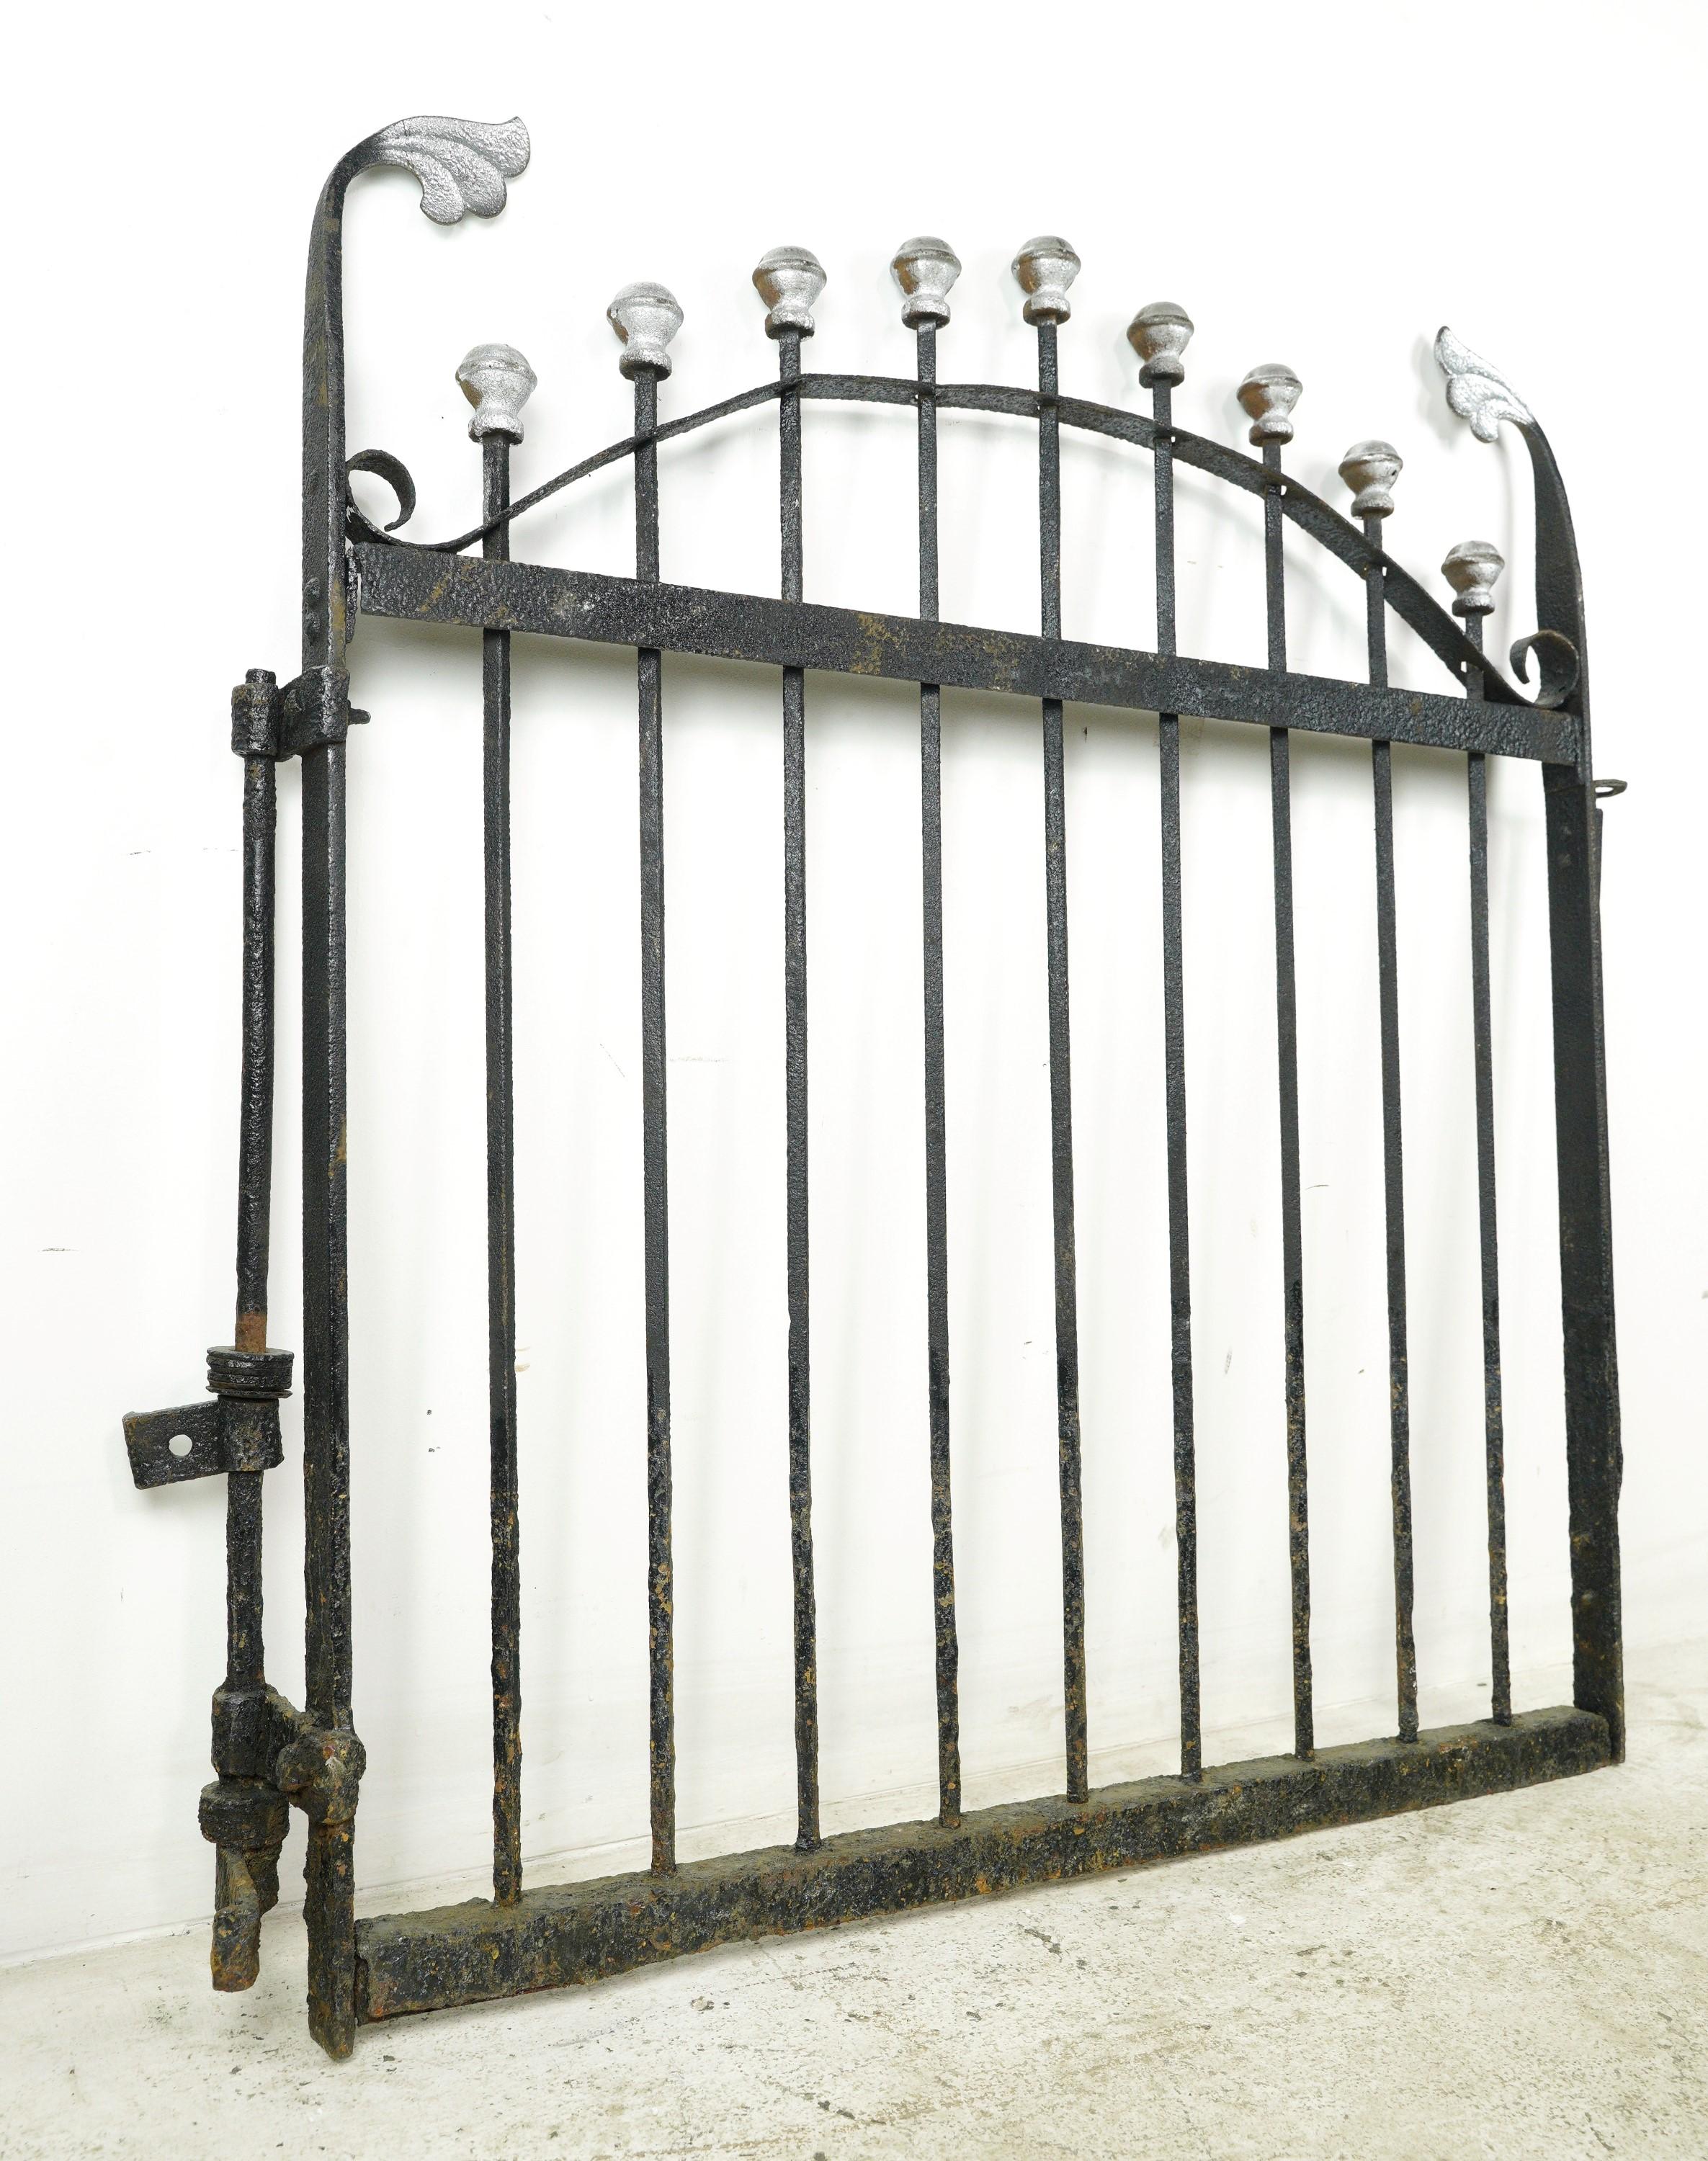 This reclaimed silver painted ball finials wrought iron privacy yard gate is perfect for creating a private outdoor space. Install it securely to add a touch of sophistication. Single installation post is included. It is in good condition, with some